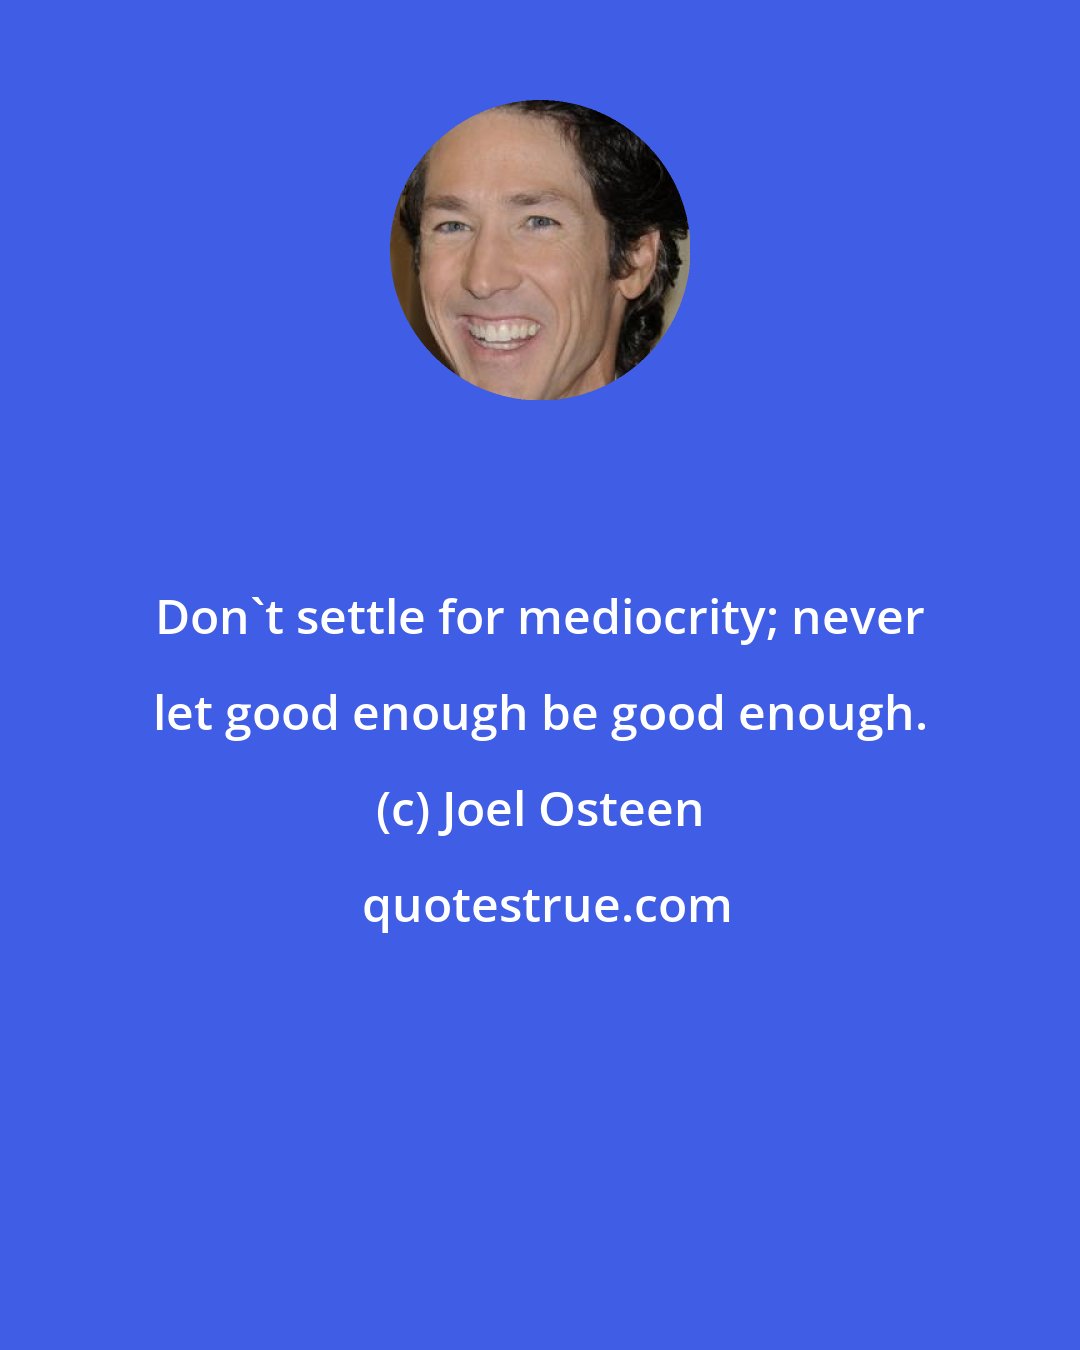 Joel Osteen: Don't settle for mediocrity; never let good enough be good enough.